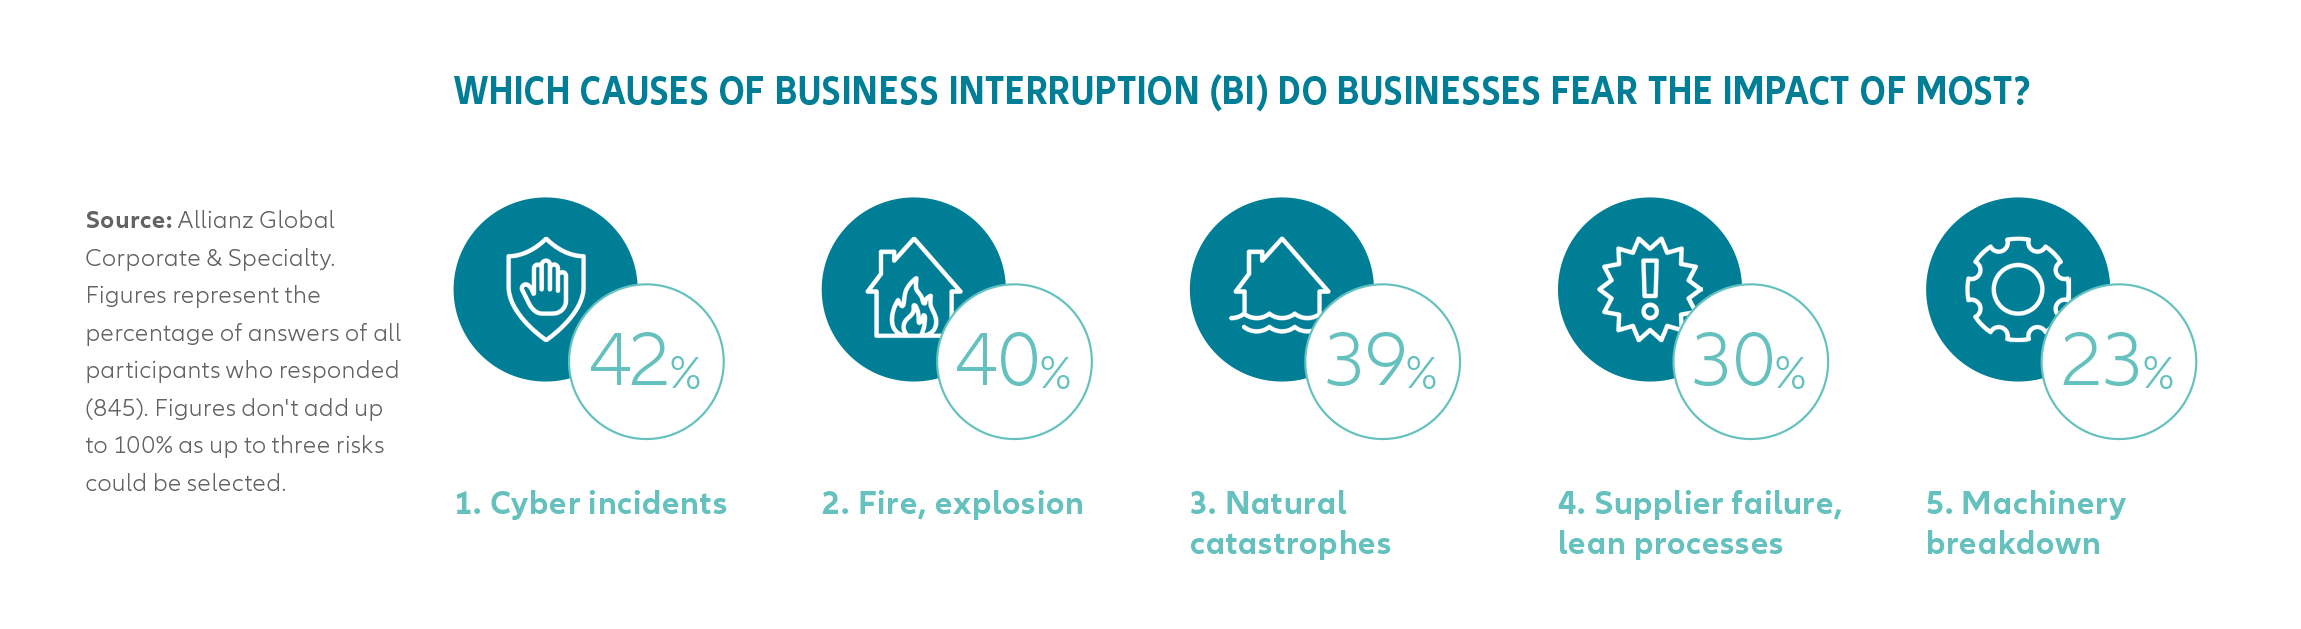 Most feared causes of business interruption